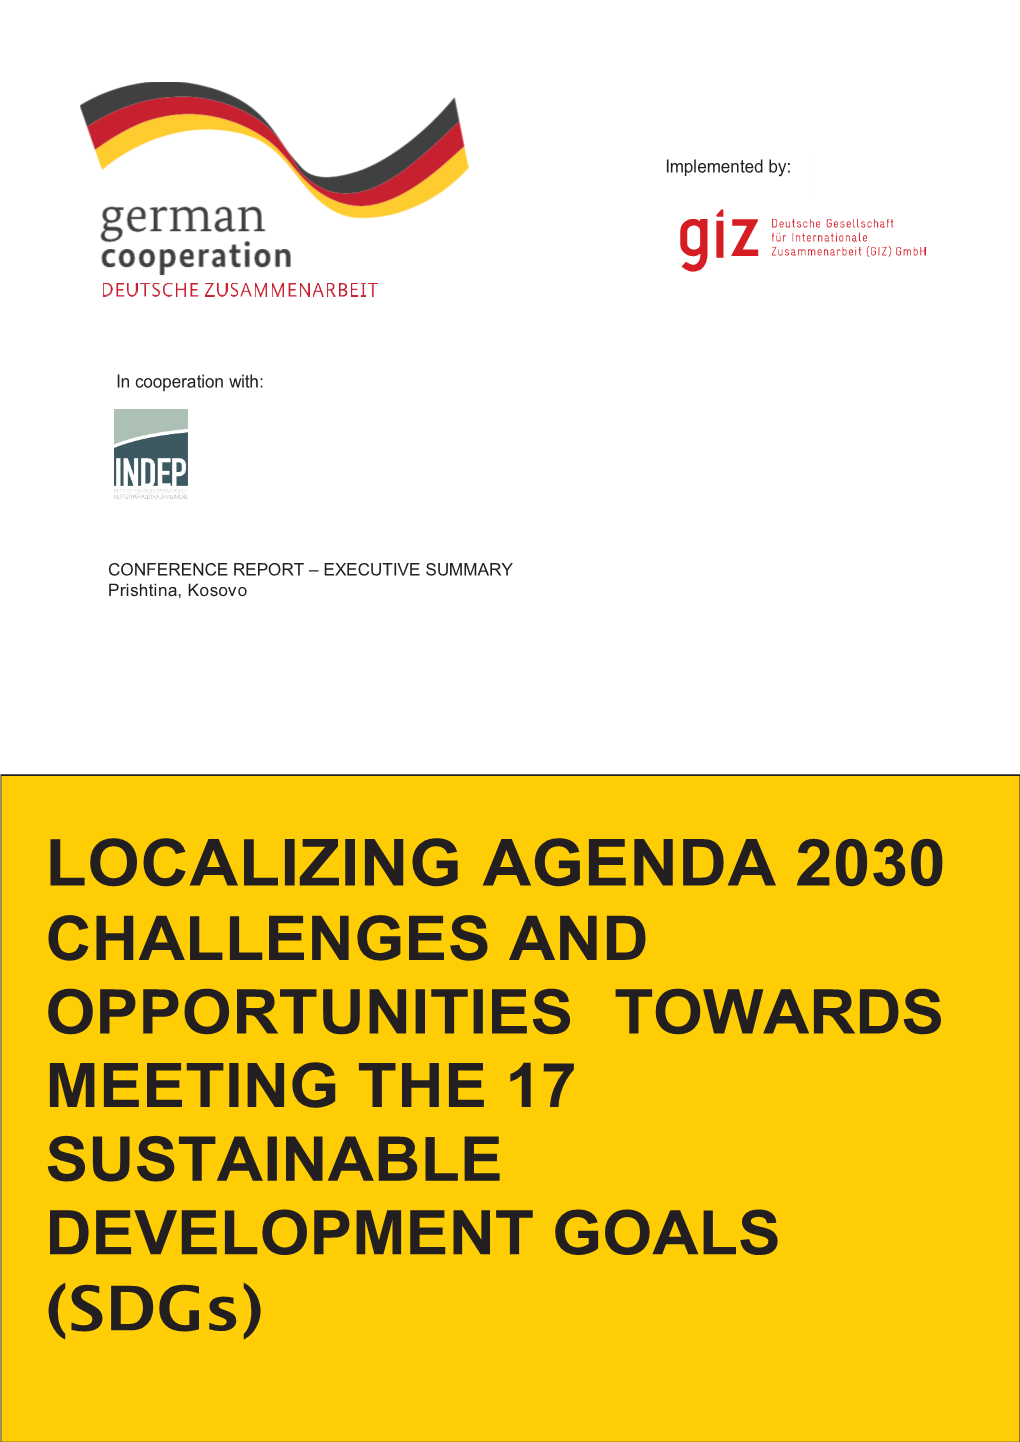 LOCALIZING AGENDA 2030 CHALLENGES and OPPORTUNITIES TOWARDS MEETING the 17 SUSTAINABLE DEVELOPMENT GOALS (SDG)(Sdgs)